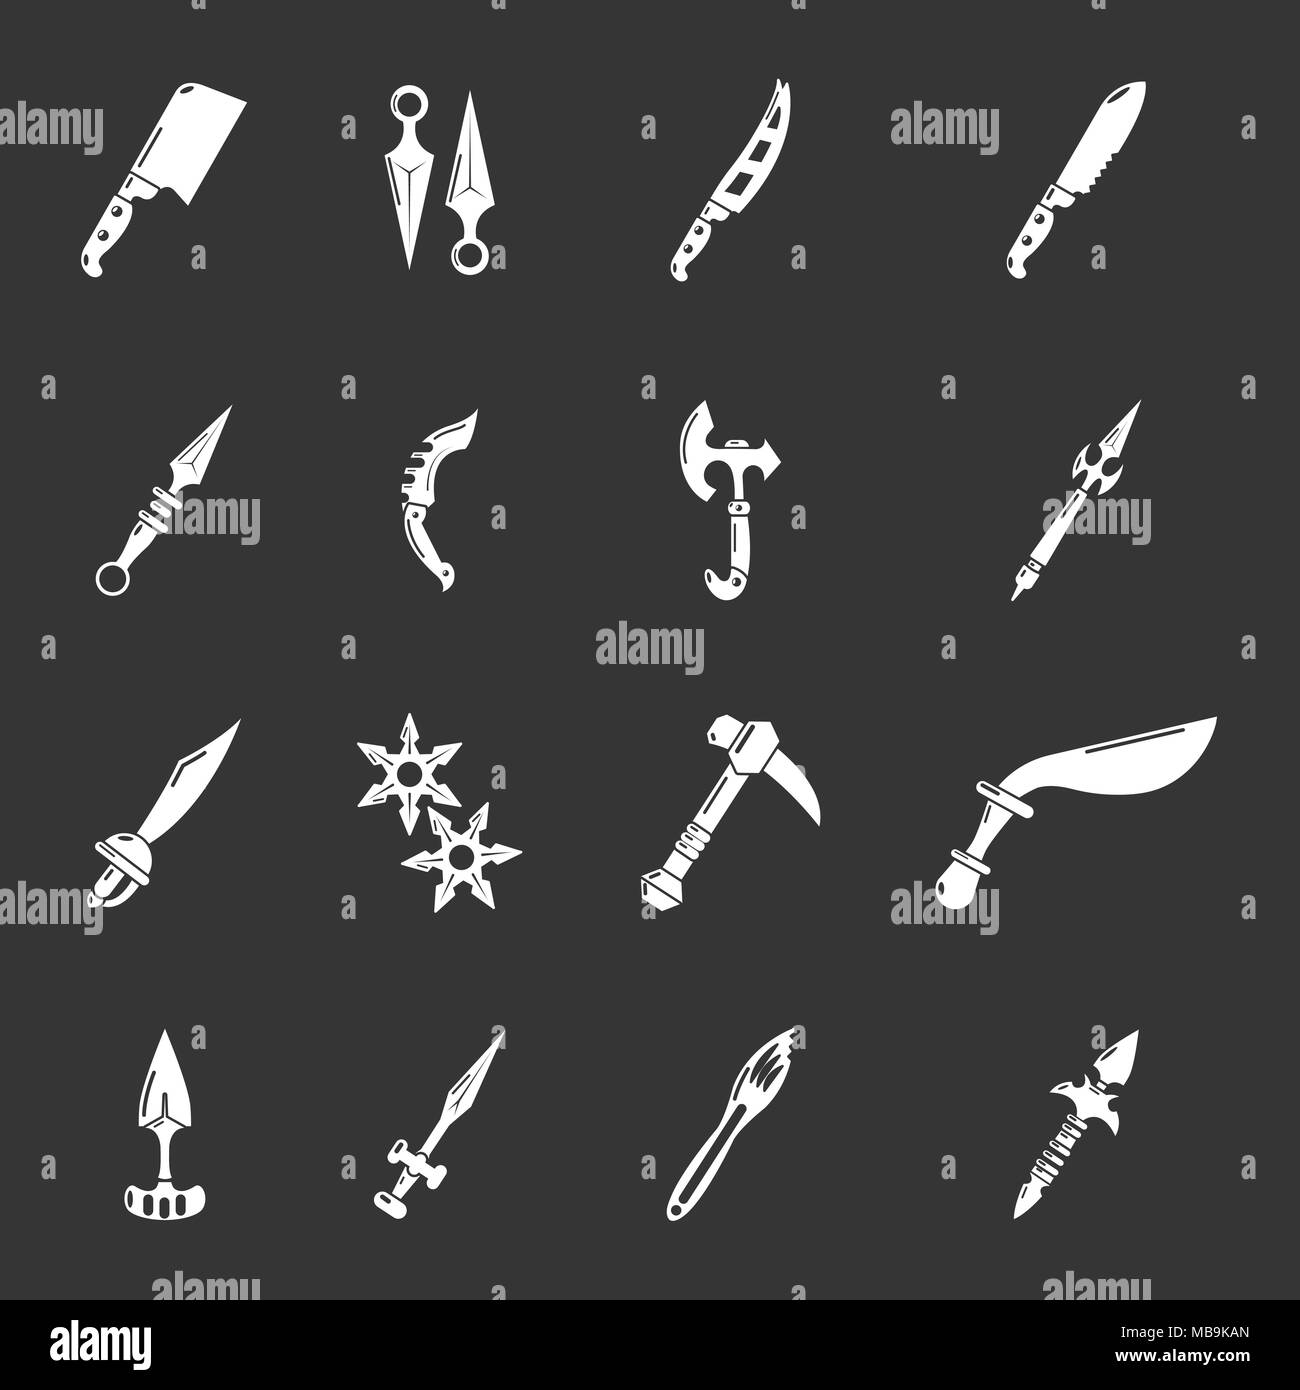 Steel arms items icons set grey vector Stock Vector